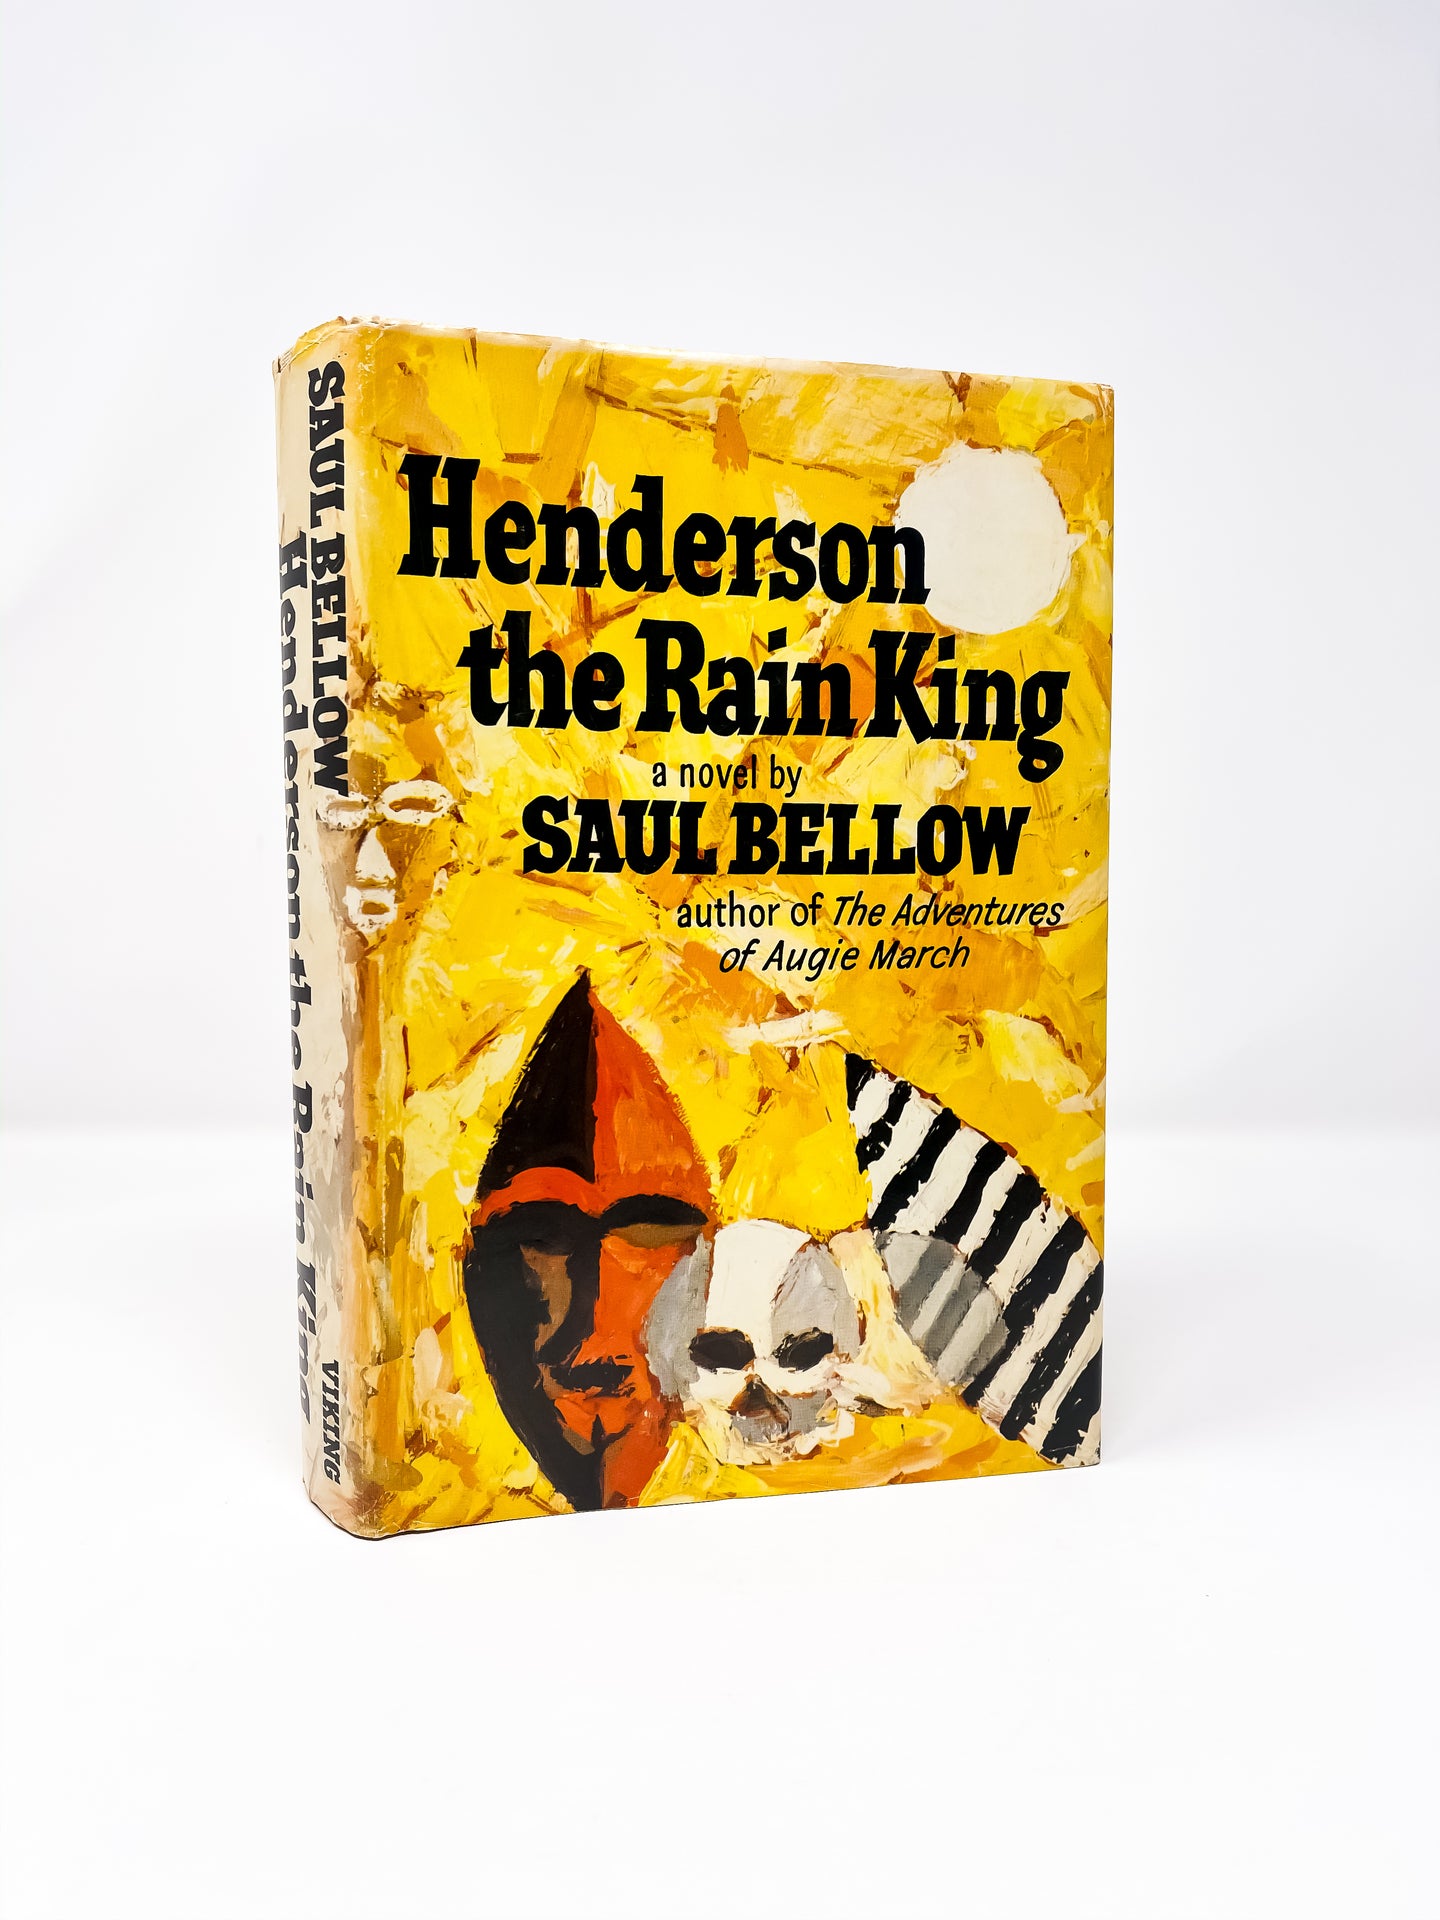 A first edition of Henderson the Rain King by Saul Bellow